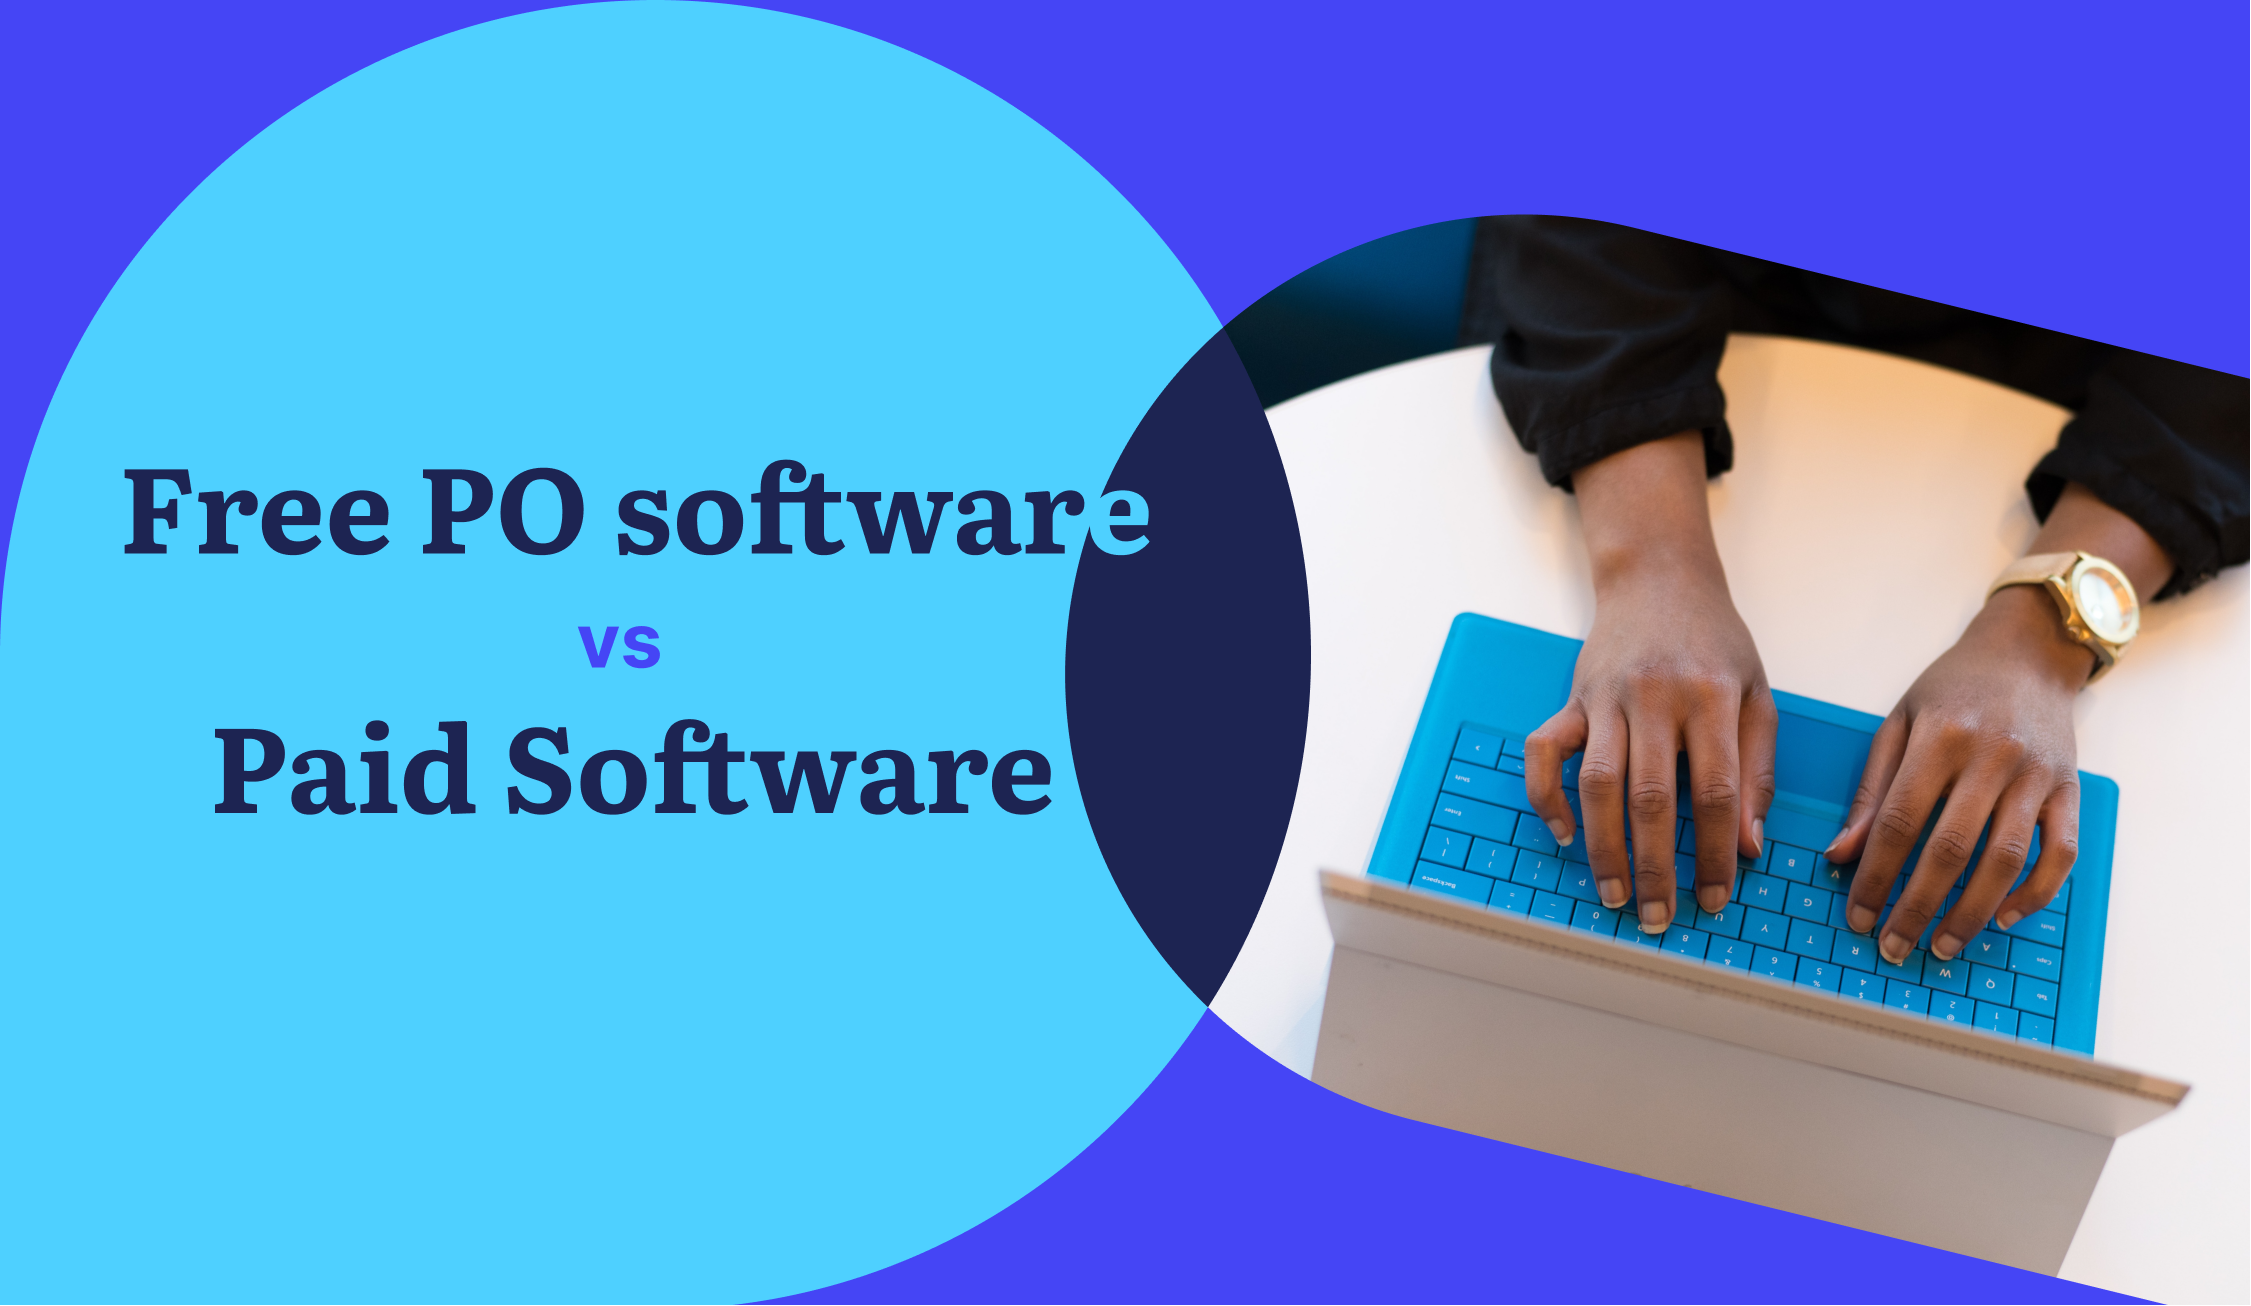 Free PO software vs Paid Software